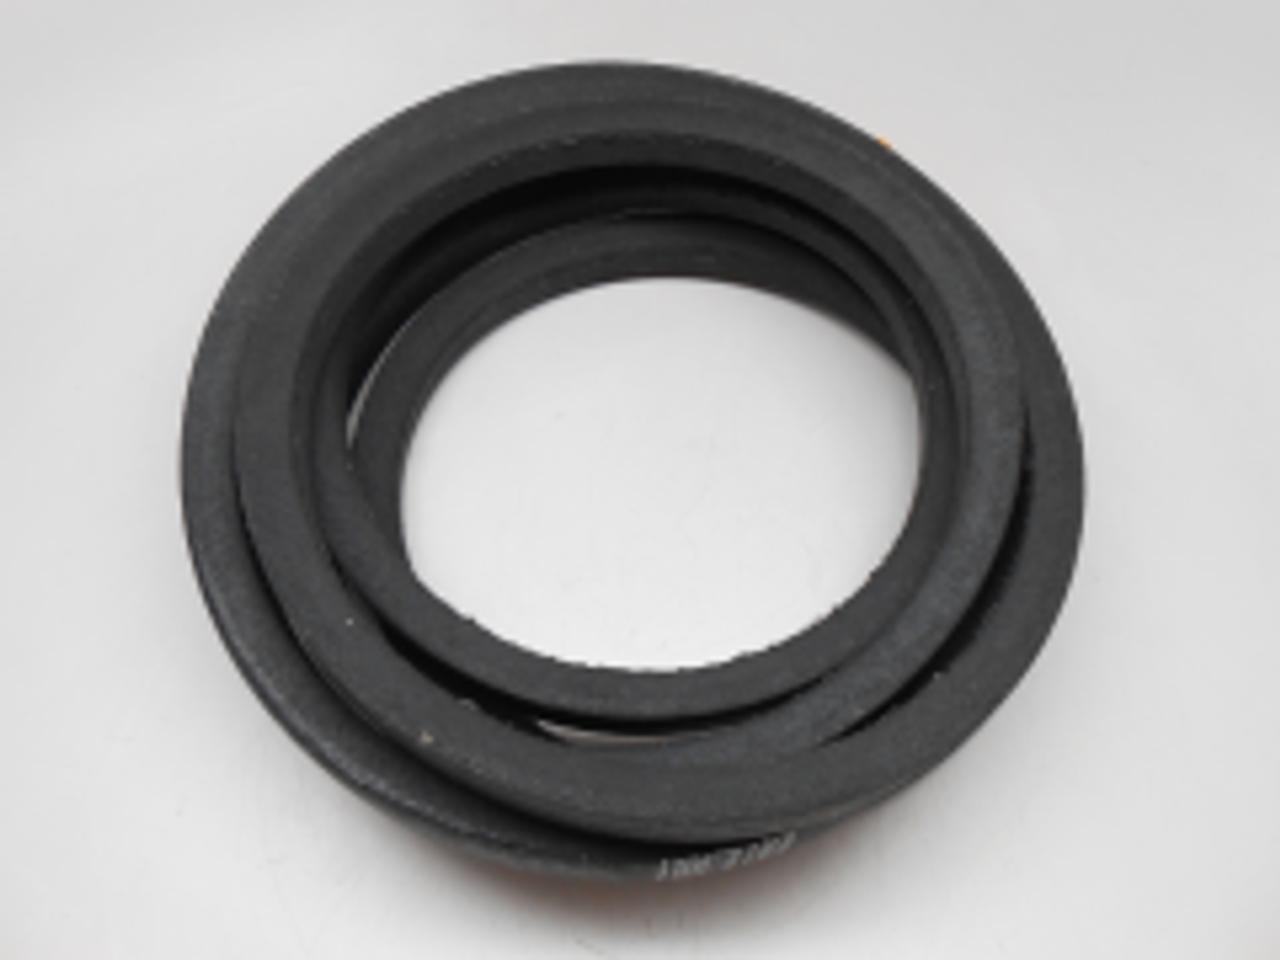 Toro 100-4164 V-BELT OEM
See Supercession: 95-3917
This part is compatible with the following machines:

Toro 79366 - Toro 44" Two-Stage Snowthrower for 5xi Garden Tractor (SN: 200000001 - 200999999) (2000) - PULLY BOX ASSEMBLY
Toro 79366 - Toro 44" Two-Stage Snowthrower for 5xi Garden Tractor (SN: 210000001 - 210999999) (2001) - PULLEY BOX ASSEMBLY
Toro 79366 - Toro 44" Two-Stage Snowthrower for 5xi Garden Tractor (SN: 220000001 - 220999999) (2002) - PULLEY BOX ASSEMBLY
Toro 79366 - Toro 44" Two-Stage Snowthrower for 5xi Garden Tractor (SN: 230000001 - 230999999) (2003) - PULLEY BOX ASSEMBLY
Toro 79366 - Toro 44" Two-Stage Snowthrower for 5xi Garden Tractors (SN: 9900001 - 9999999) (1999) - PULLEY BOX ASSEMBLY
Toro 79366 - Toro 44" Two-Stage Snowthrower for 5xi Garden Tractor (SN: 240000001 - 240999999) (2004) - PULLEY BOX ASSEMBLY
Toro 79366 - Toro 44" Two-Stage Snowthrower for 5xi Garden Tractor (SN: 250000001 - 250999999) (2005) - PULLEY BOX ASSEMBLY
Toro 79366 - Toro 44" Two-Stage Snowthrower for 5xi Garden Tractor (SN: 260000001 - 260999999) (2006) - PULLEY BOX ASSEMBLY
Toro 79366 - Toro 44" Two-Stage Snowthrower for 5xi Garden Tractor (SN: 270000001 - 270999999) (2007) - PULLEY BOX ASSEMBLY
